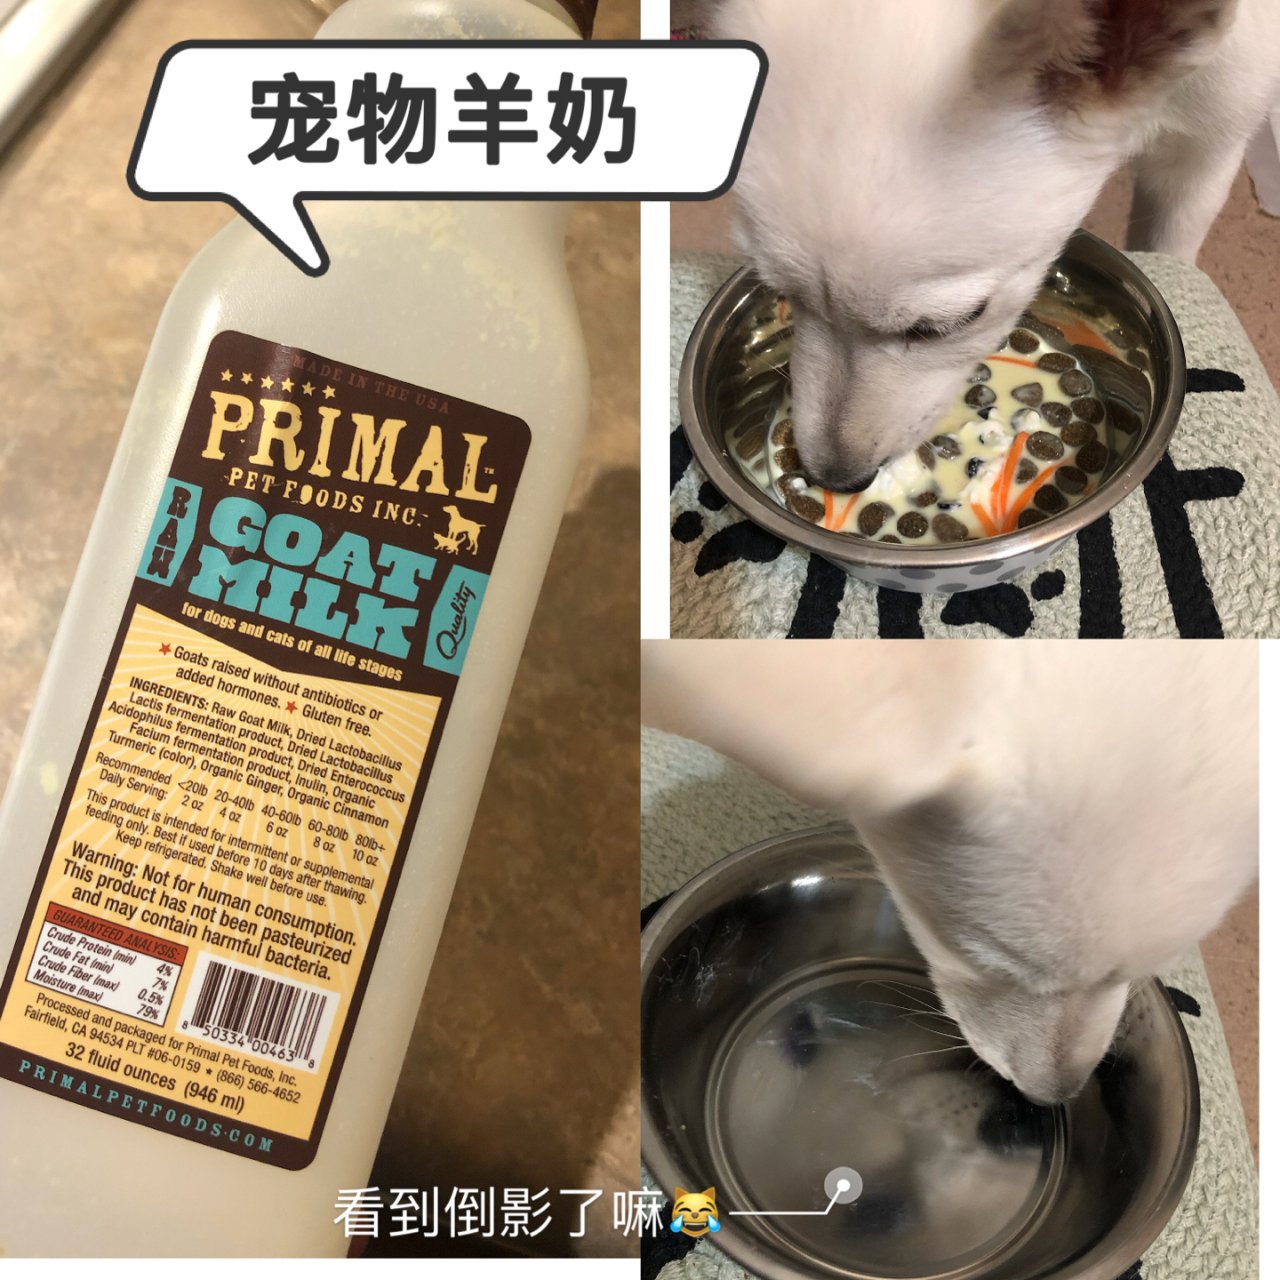 Primal,Chewy.com,Petco